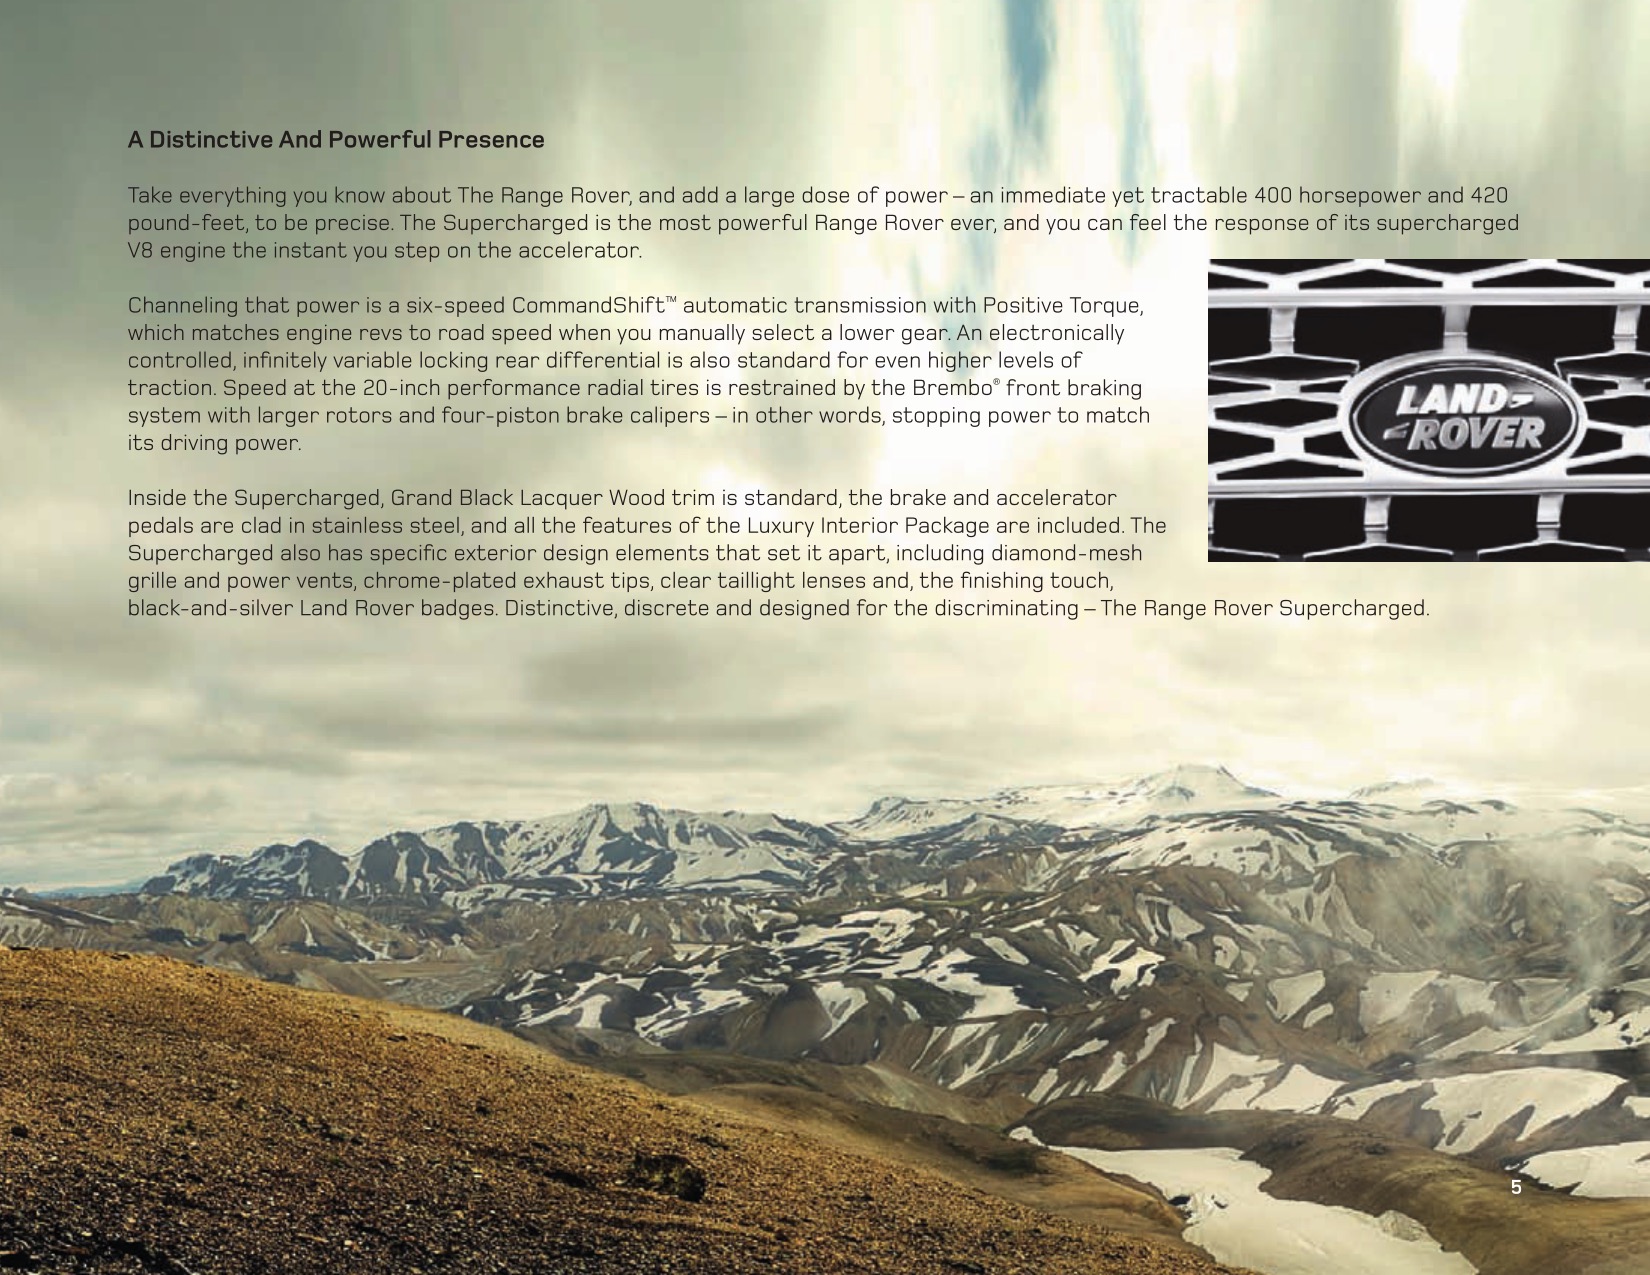 2009 Land Rover Brochure Page 30